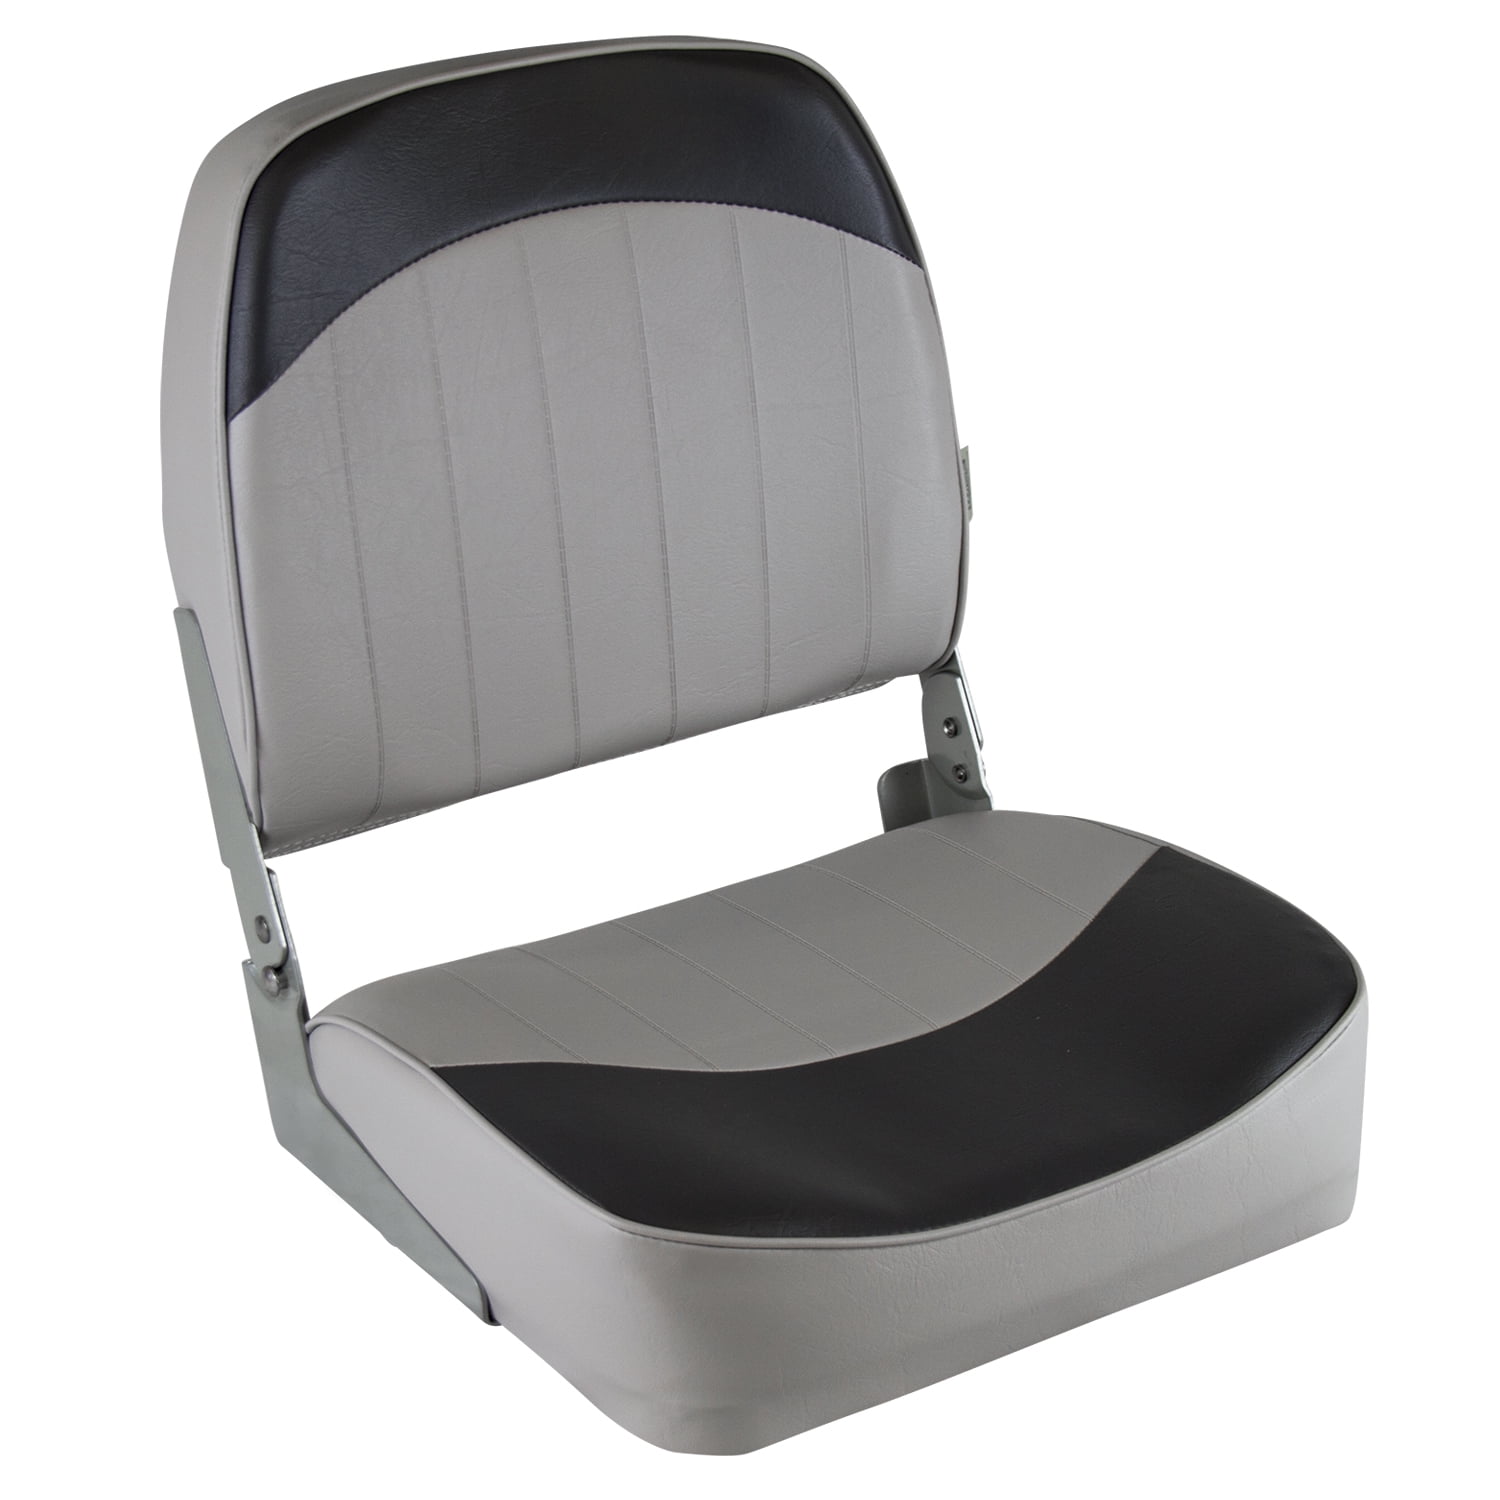 FISHING BOAT SEAT Wise WD588 Series Standard High Back Seat CHAIR WATER OCEAN 